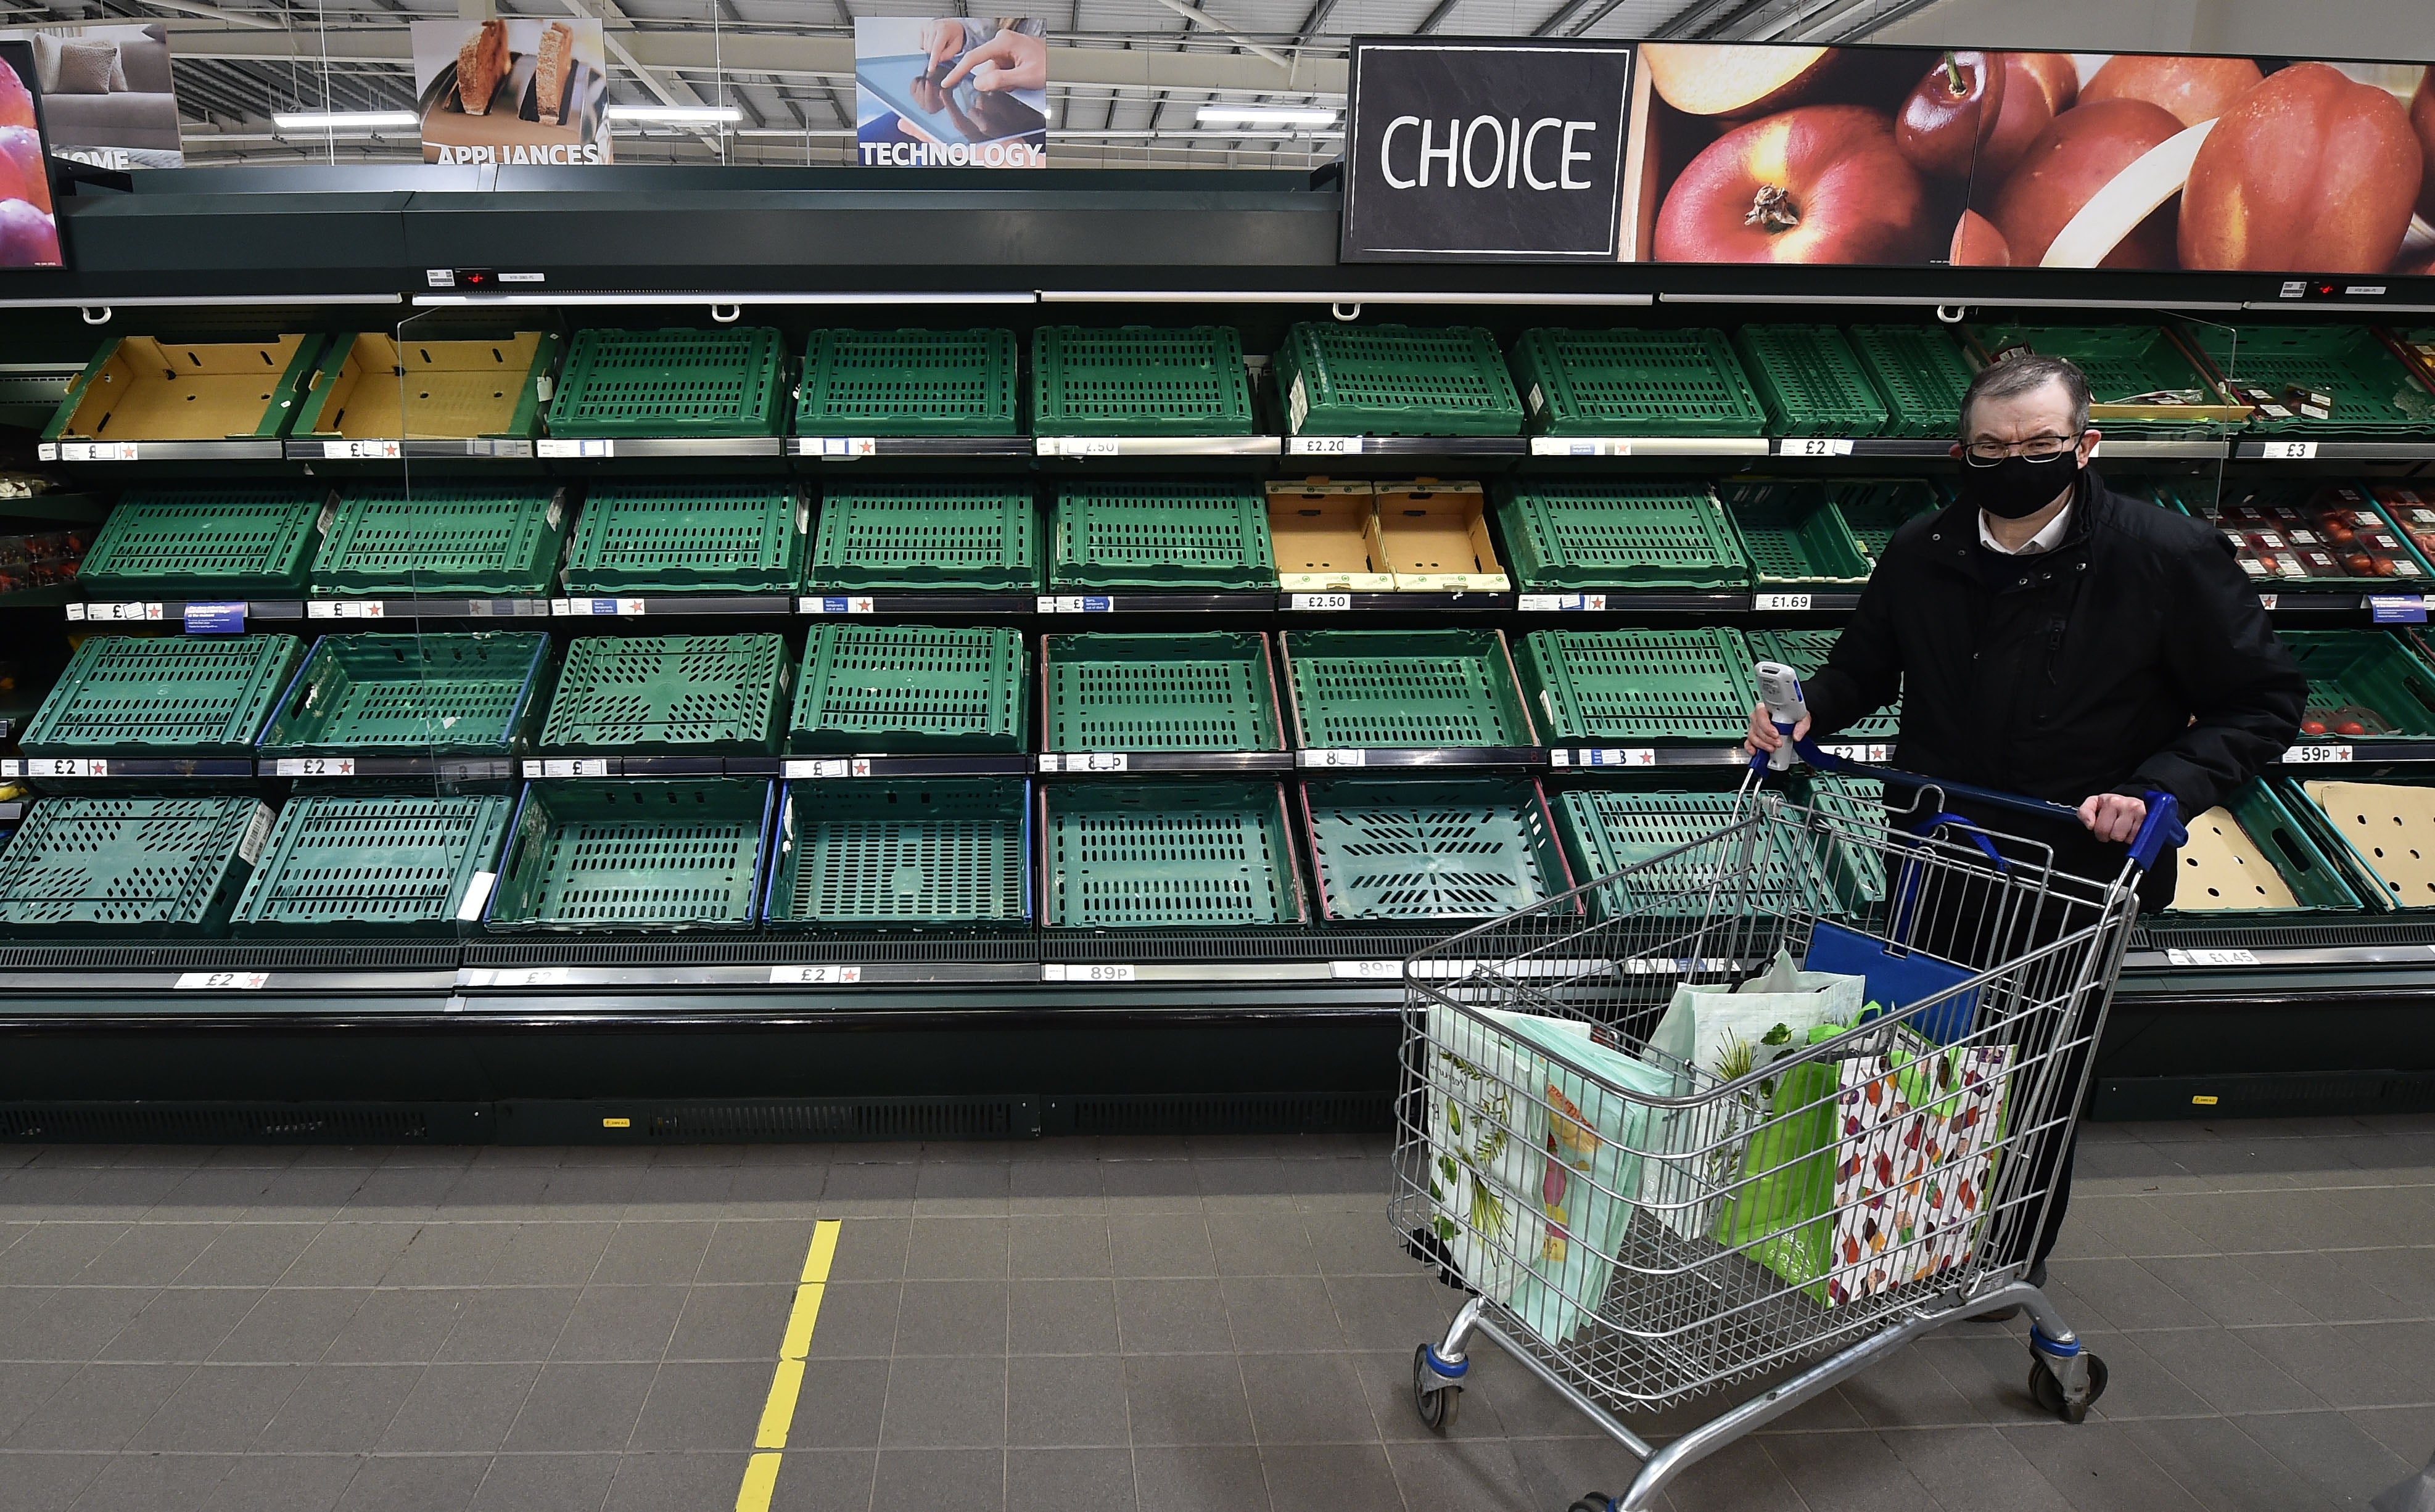 Shoppers have been faced with empty shelves